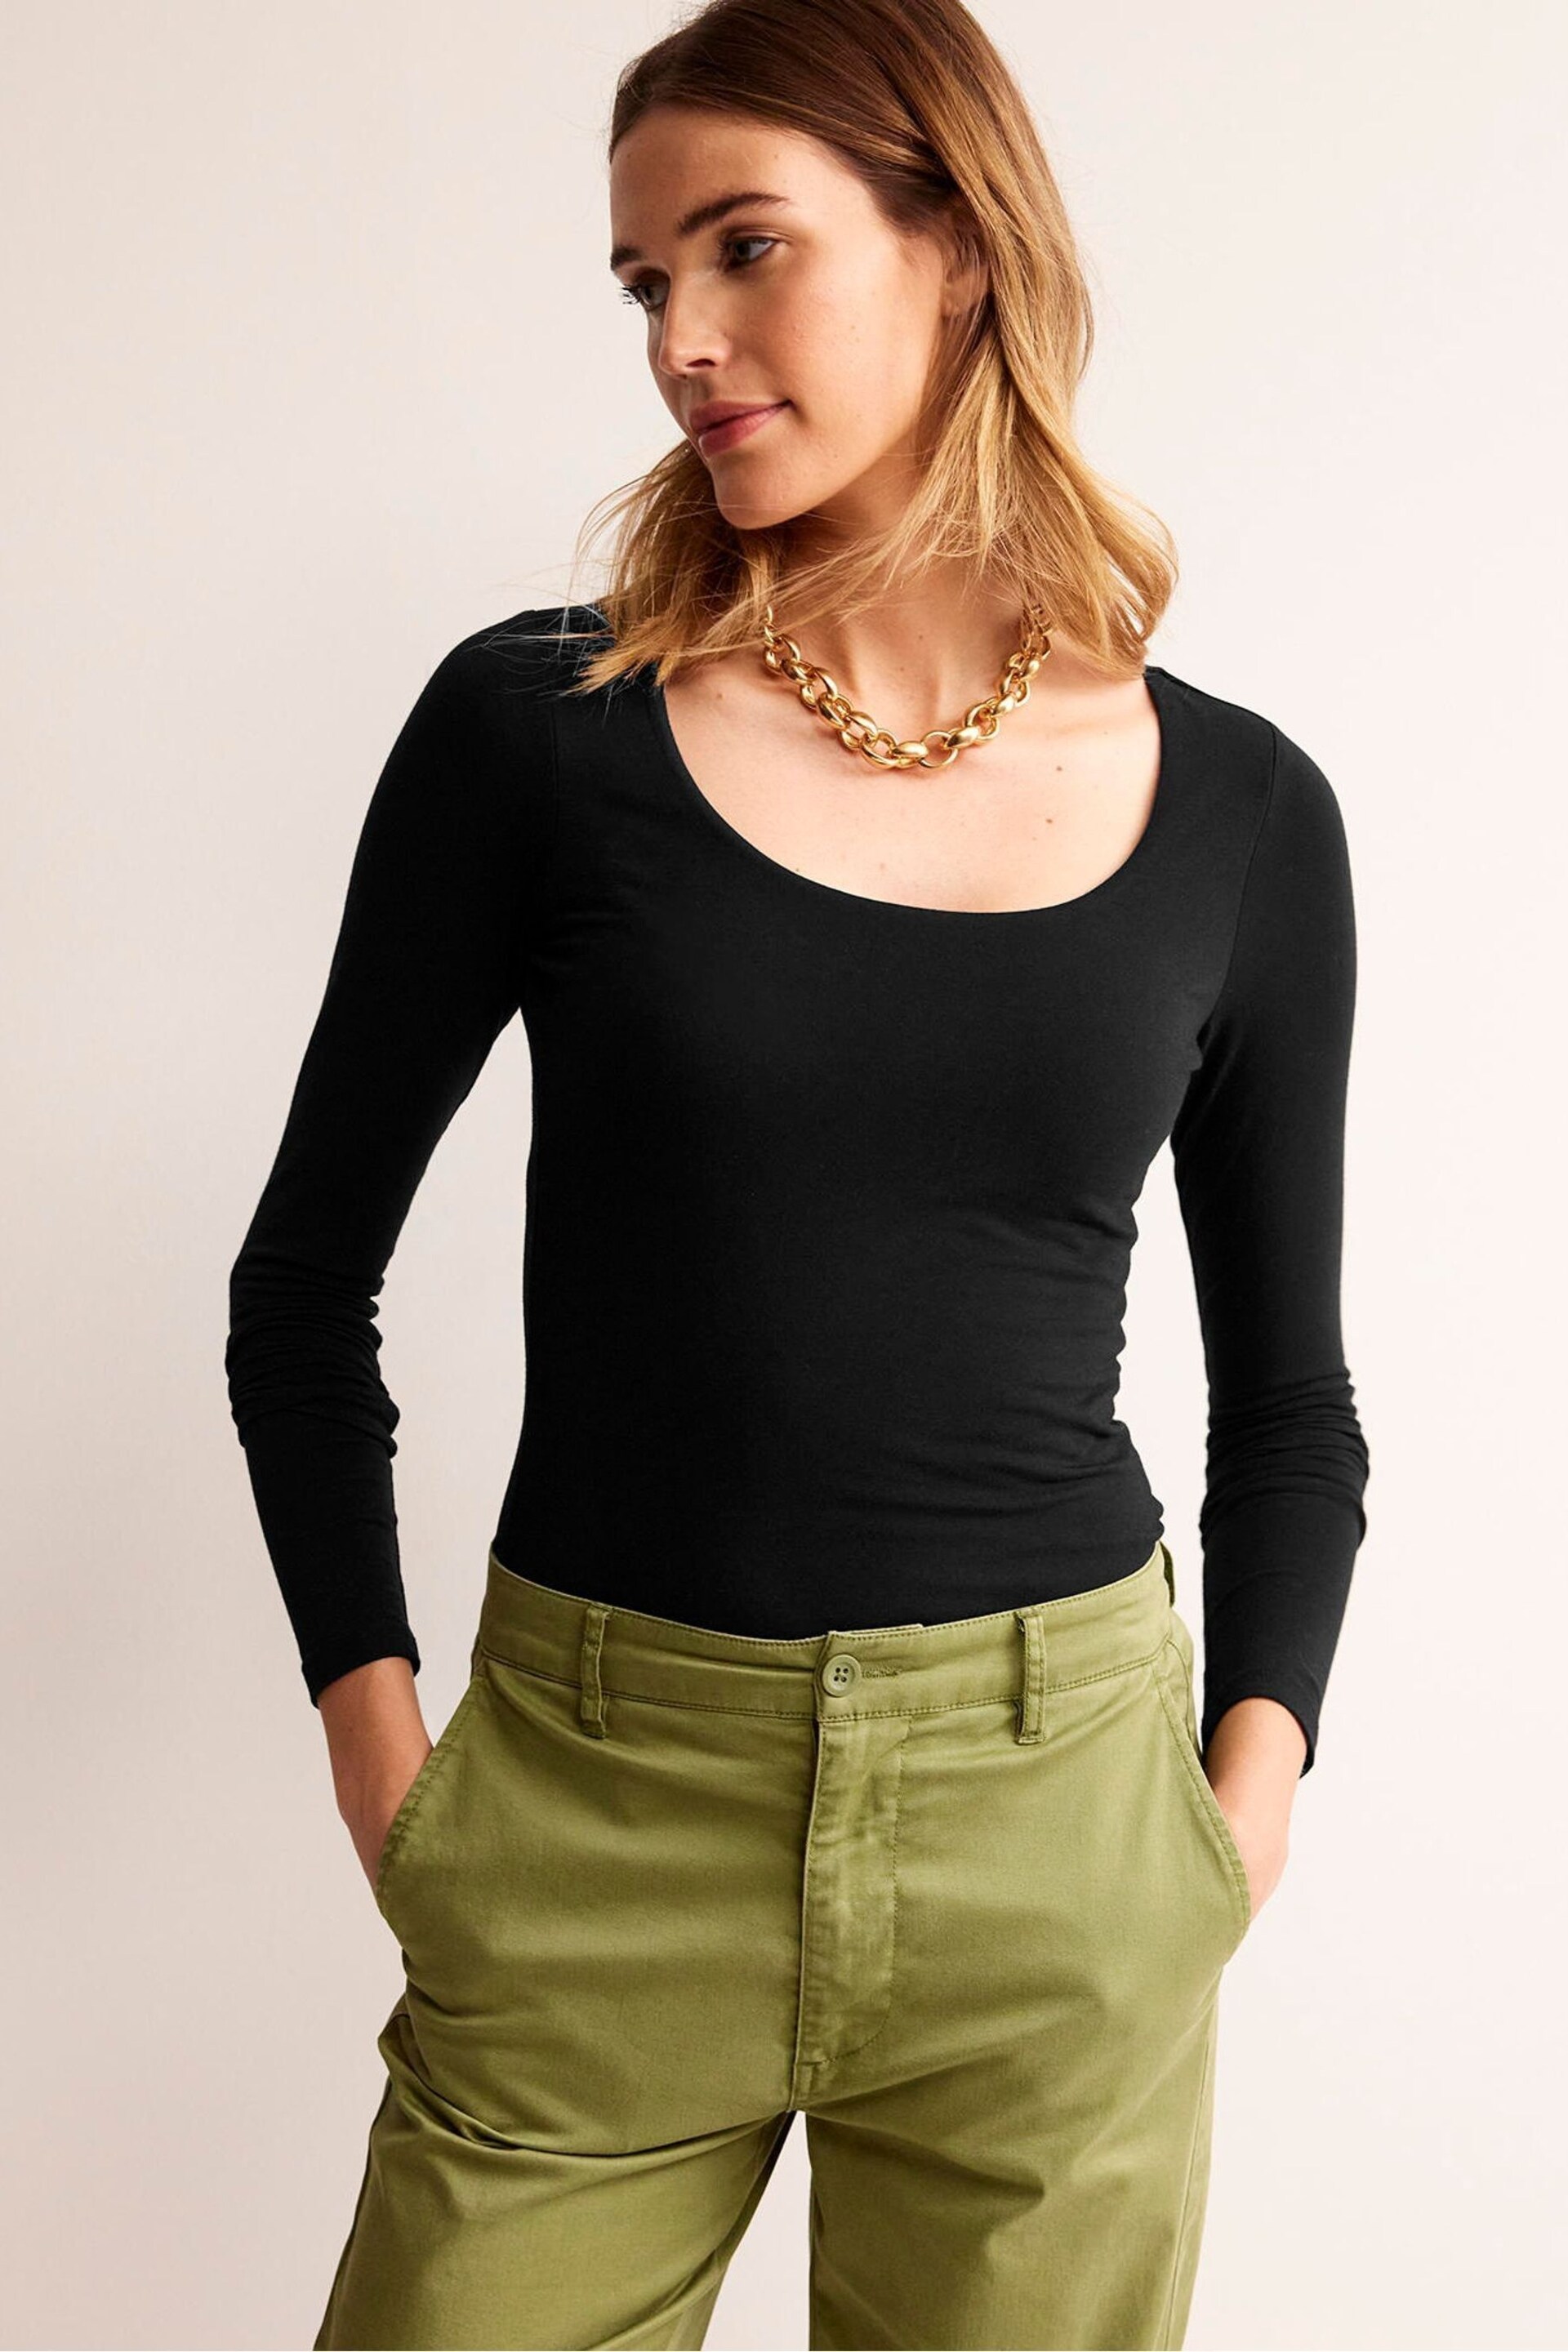 Boden Black Double Layer Scoop Neck Long Sleeve T-Shirt - Image 1 of 5